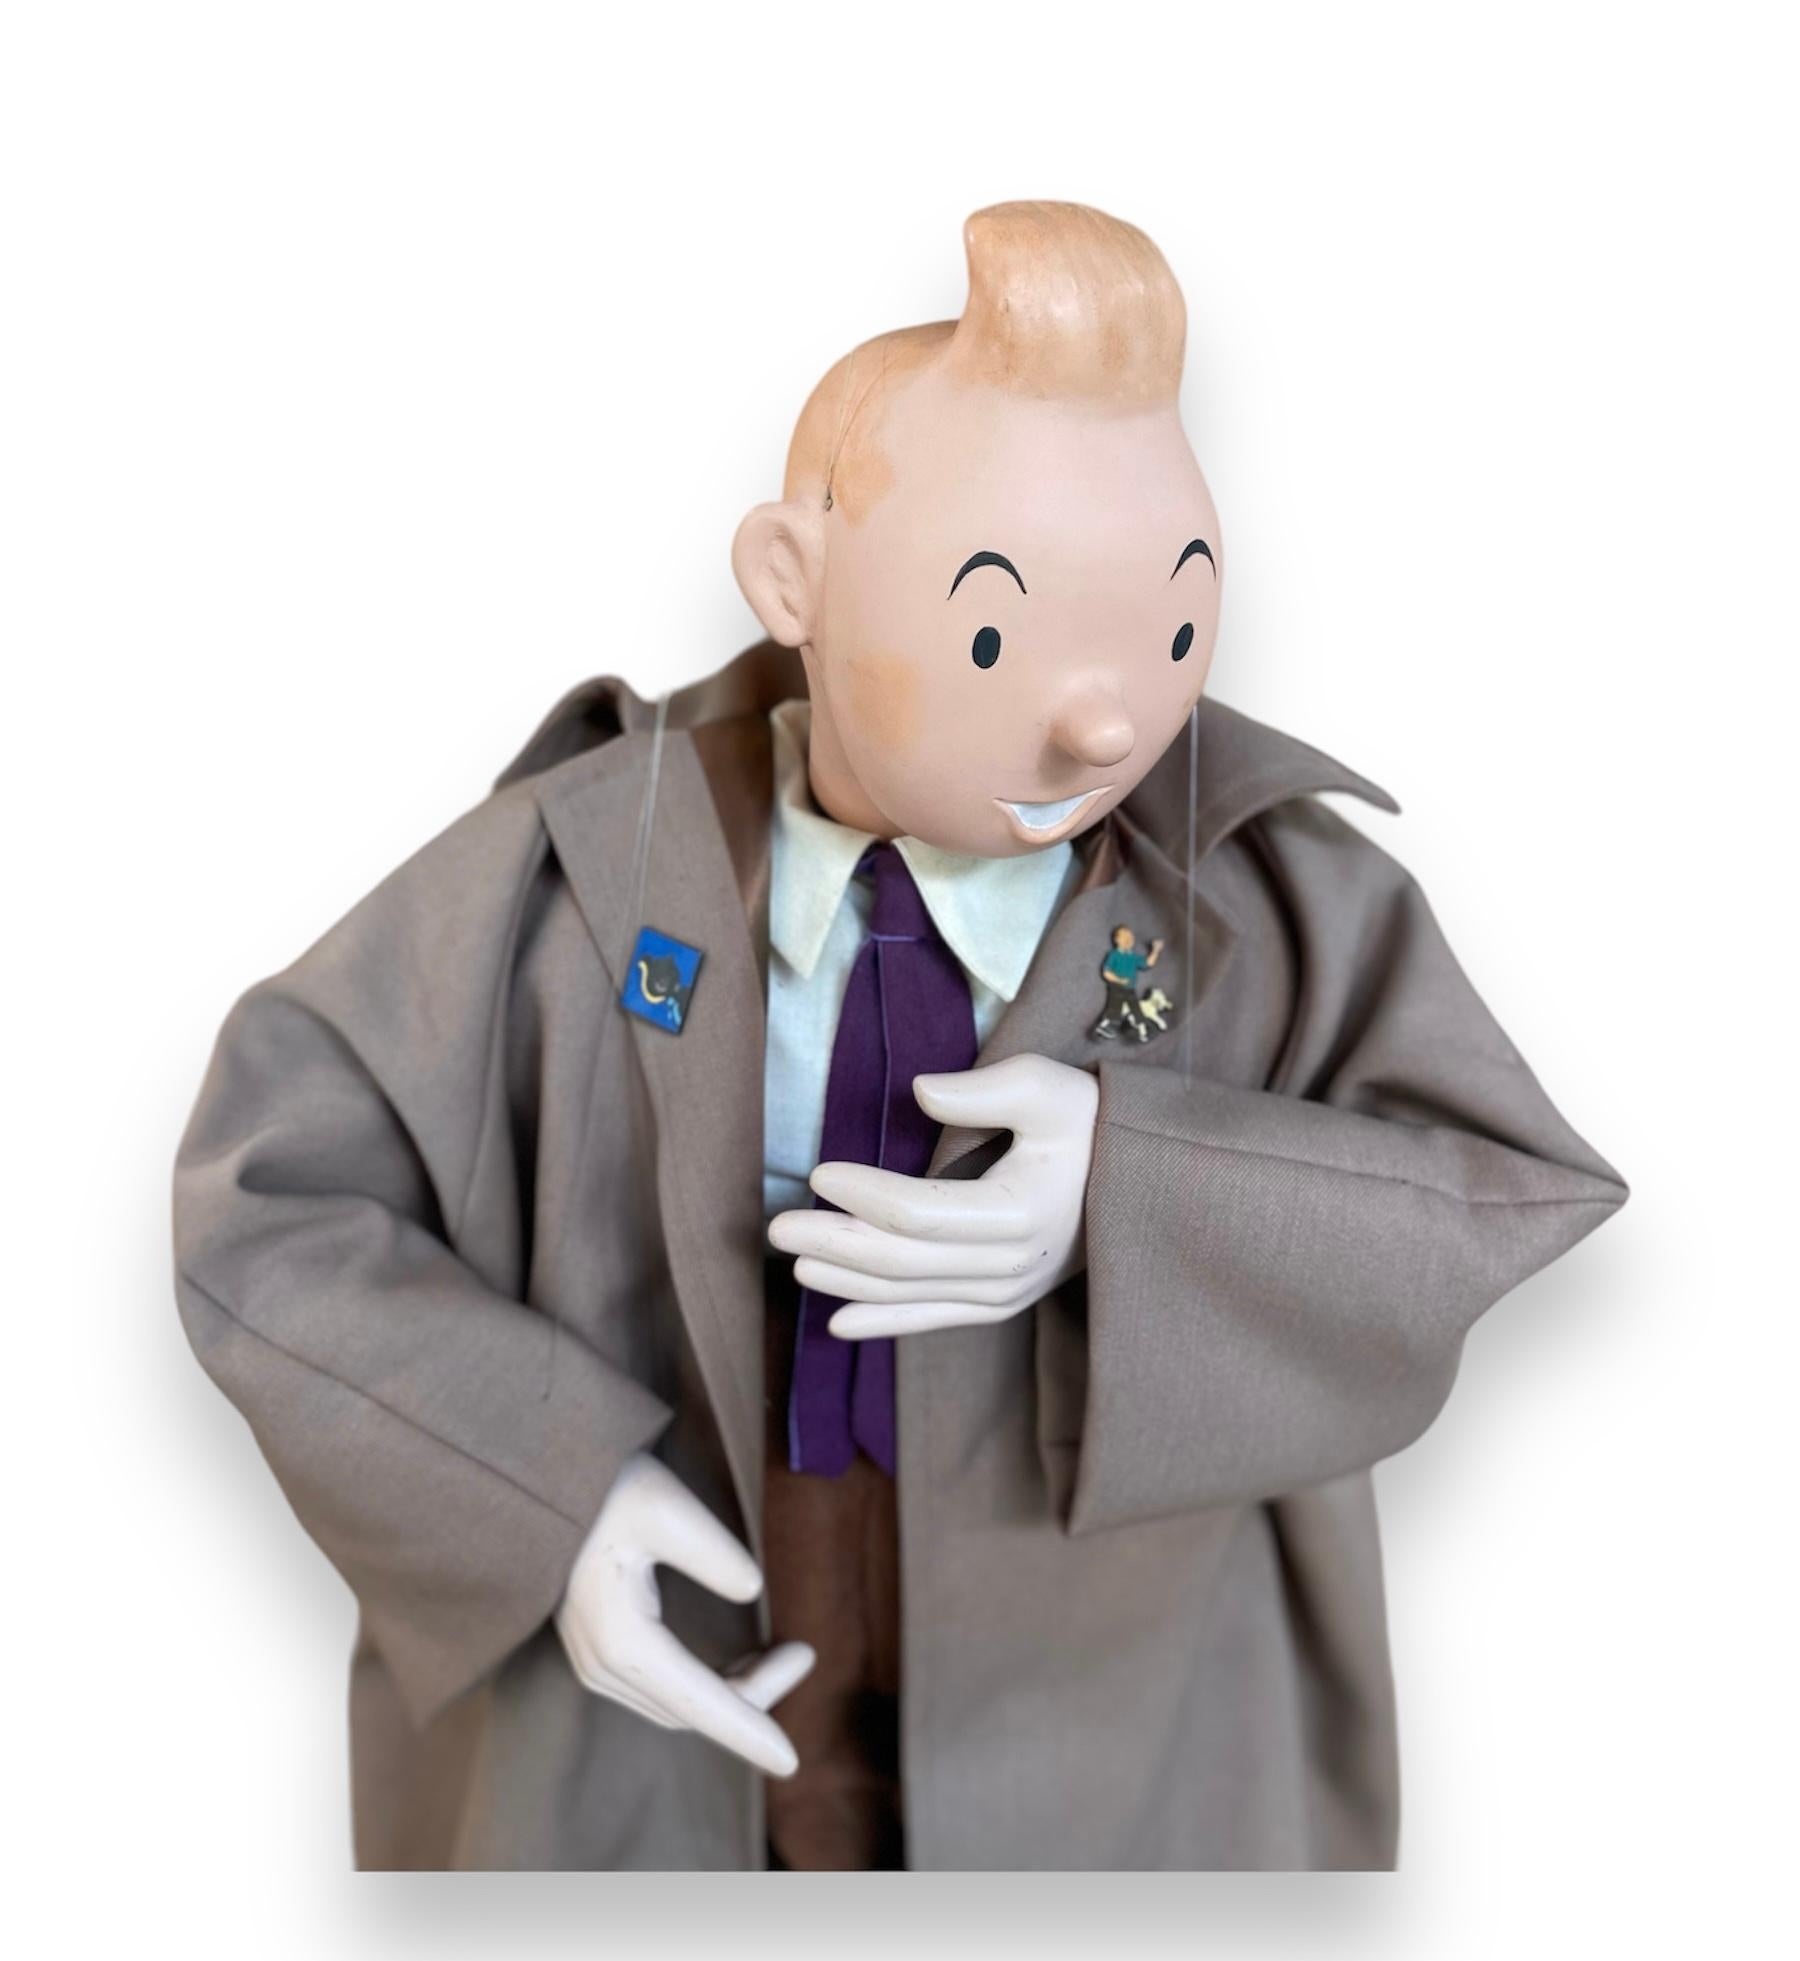 Very Rare Tintin Puppet Hergé, Georges Remi Dit For Sale 4